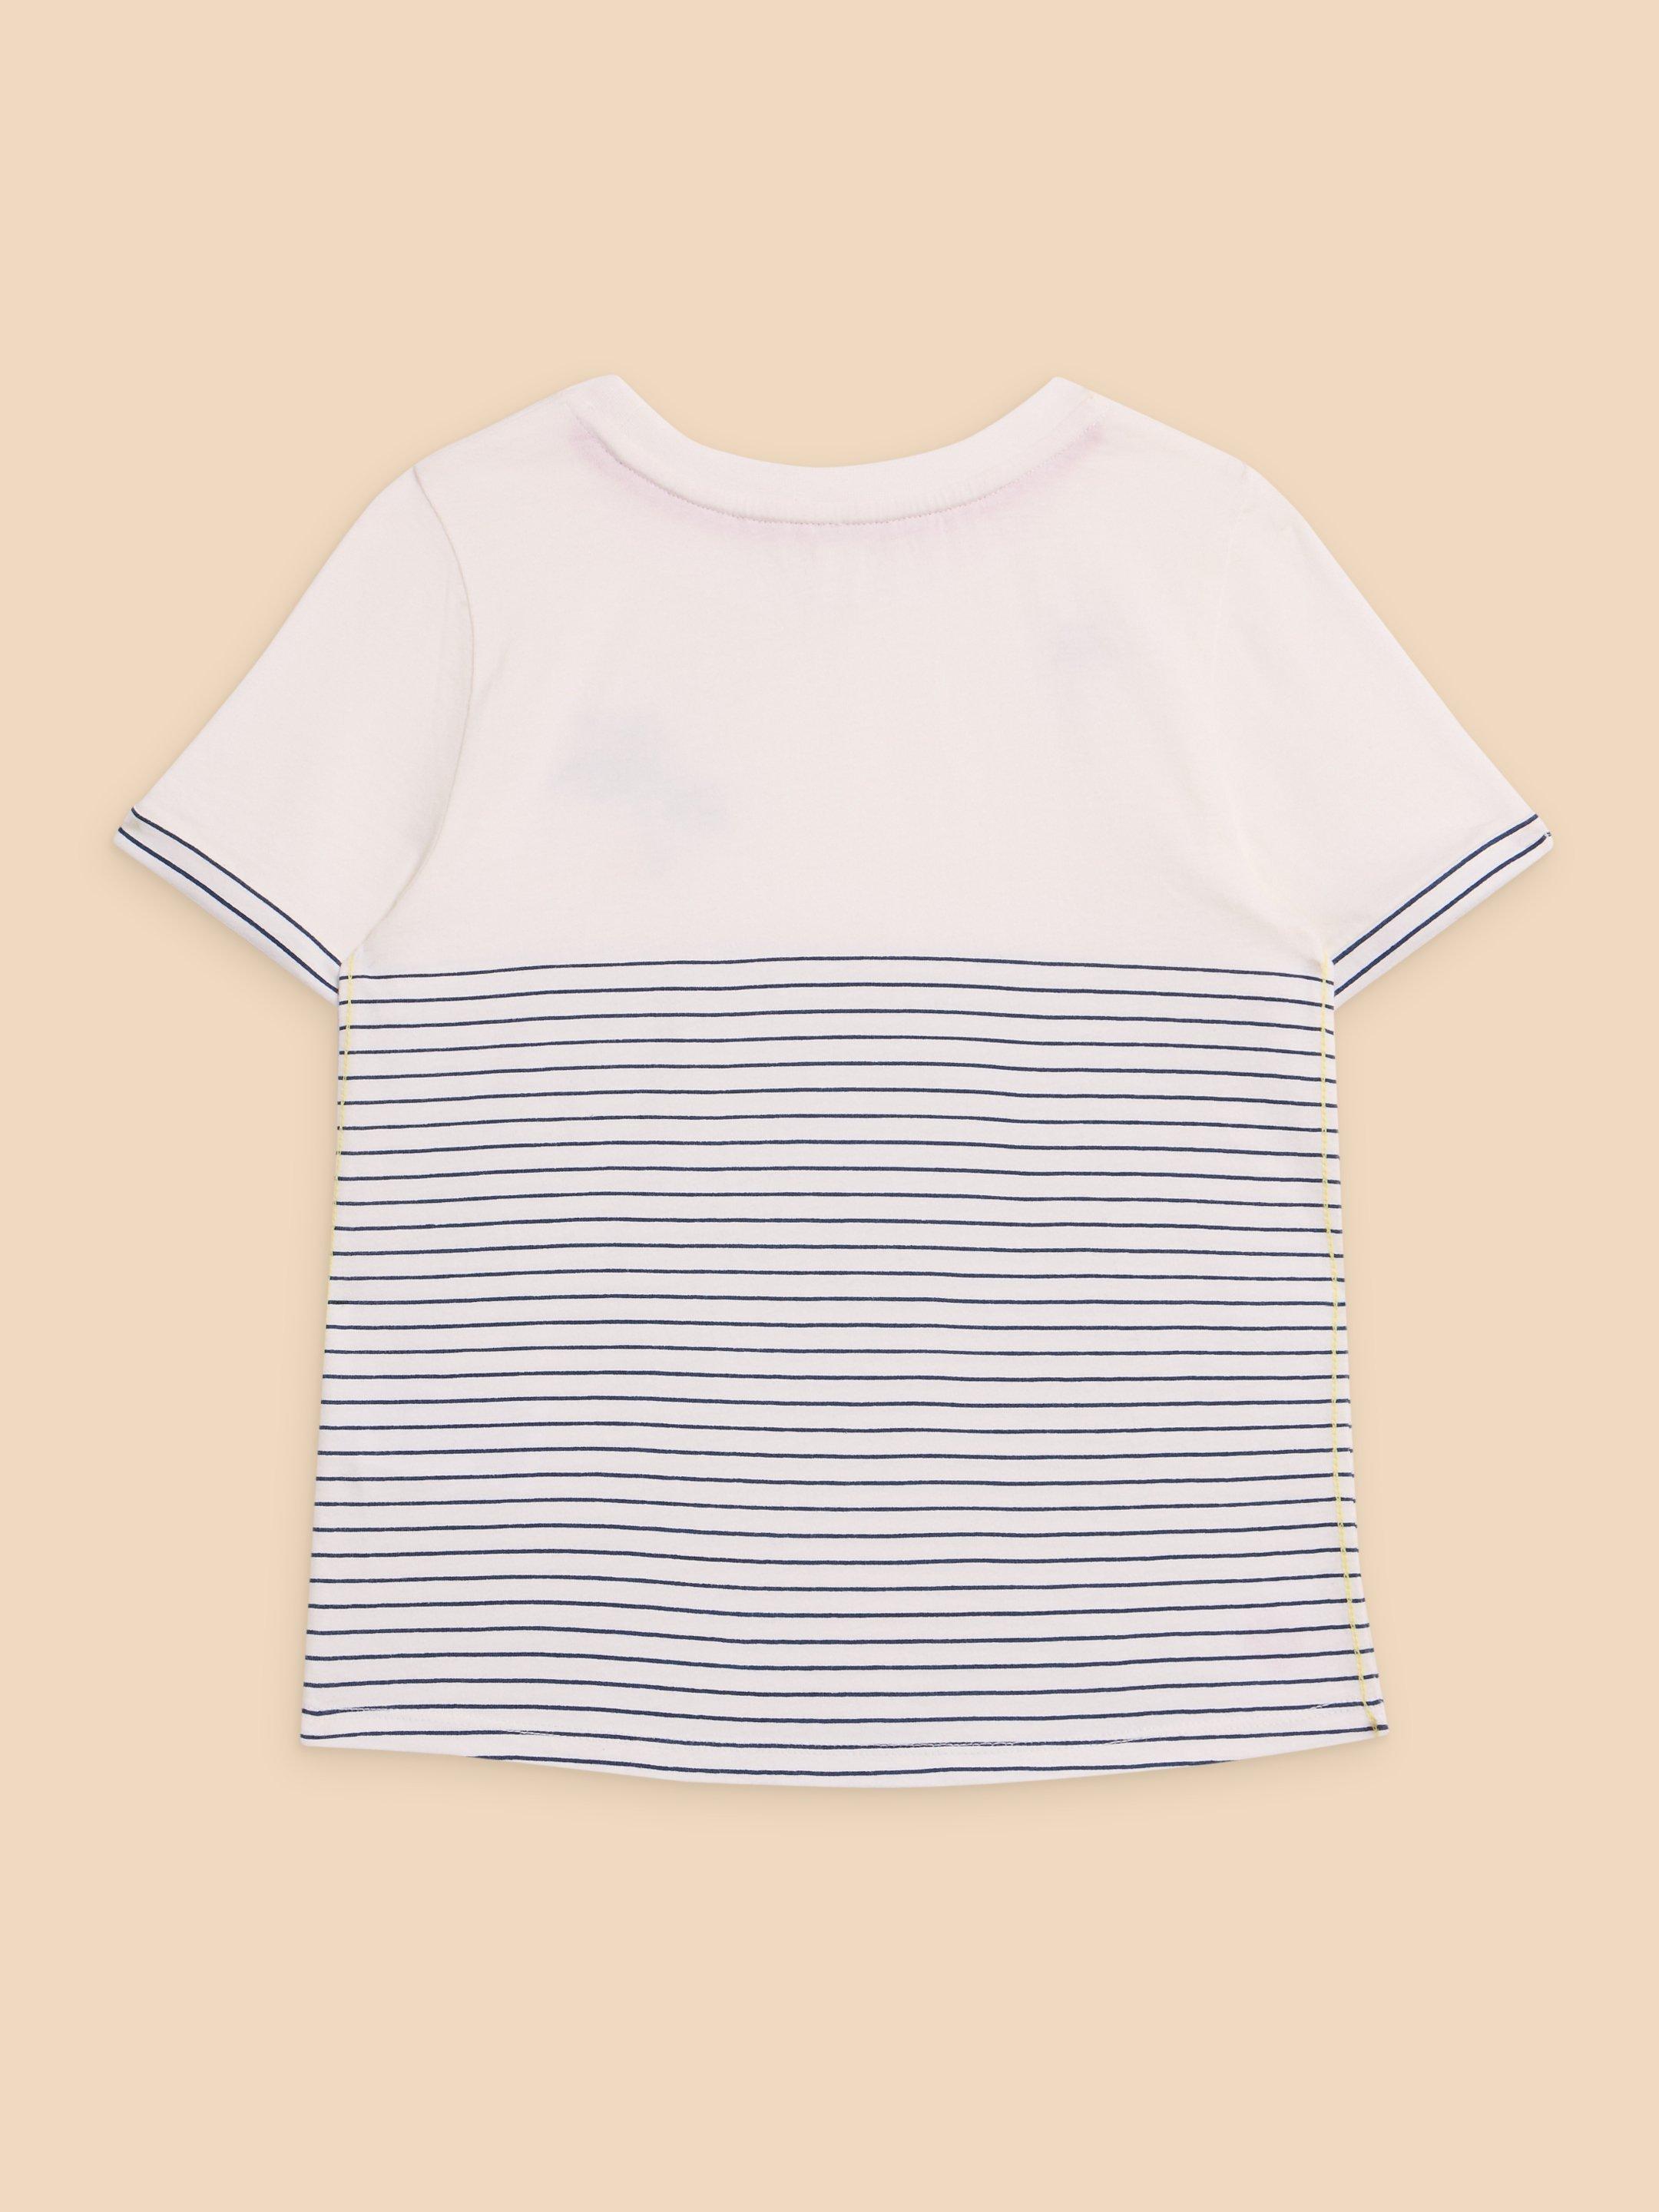 Embroidered Stripe Tee in IVORY MLT - FLAT BACK